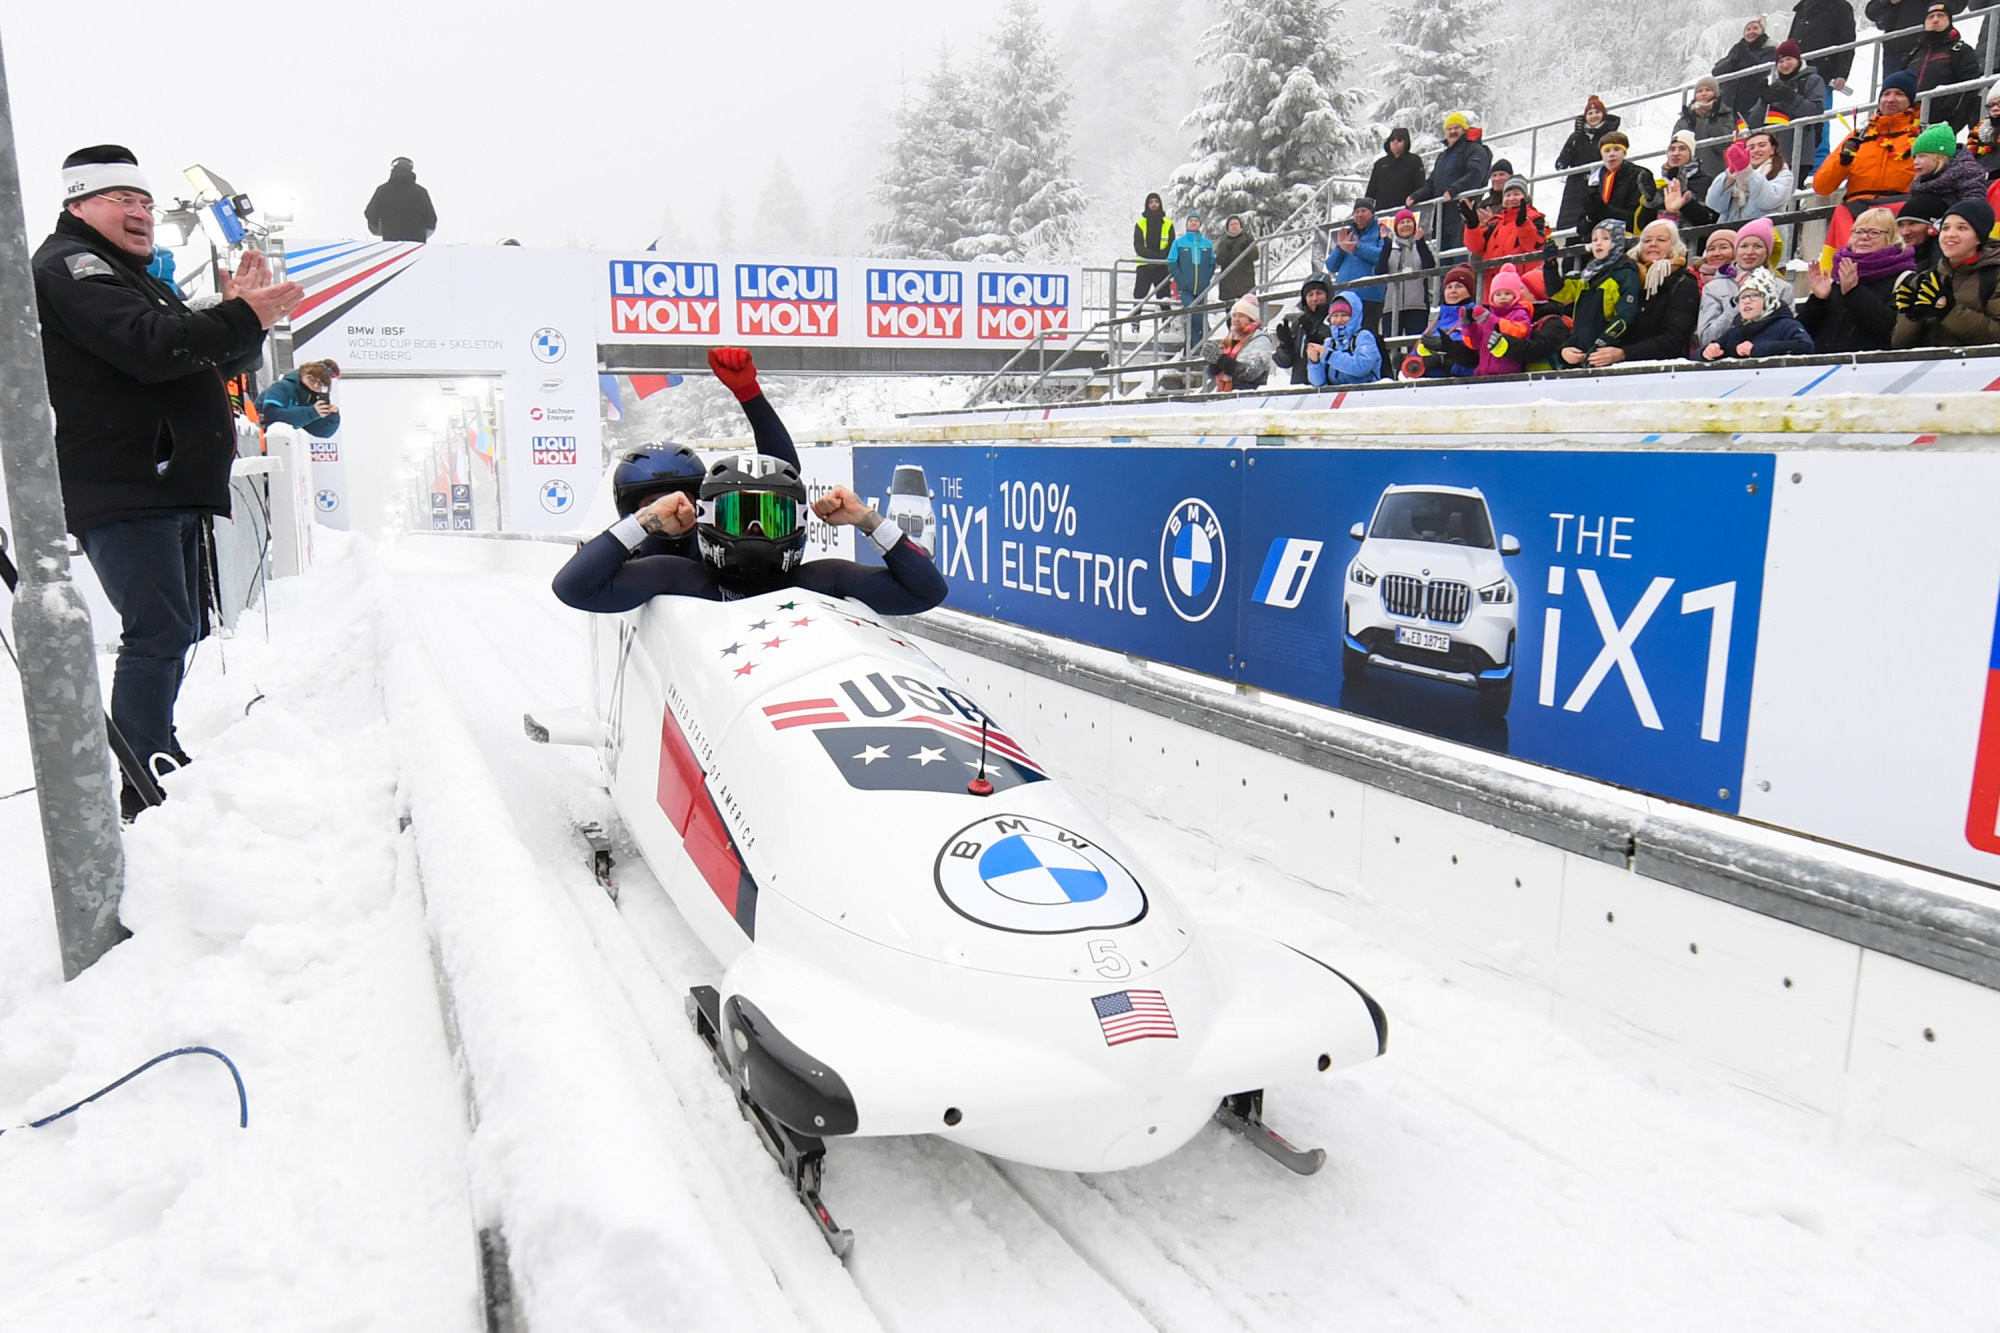 Kaillie Humphries and Kaysha Love won the two-woman bobsleigh World Cup event for the United States ©IBSF